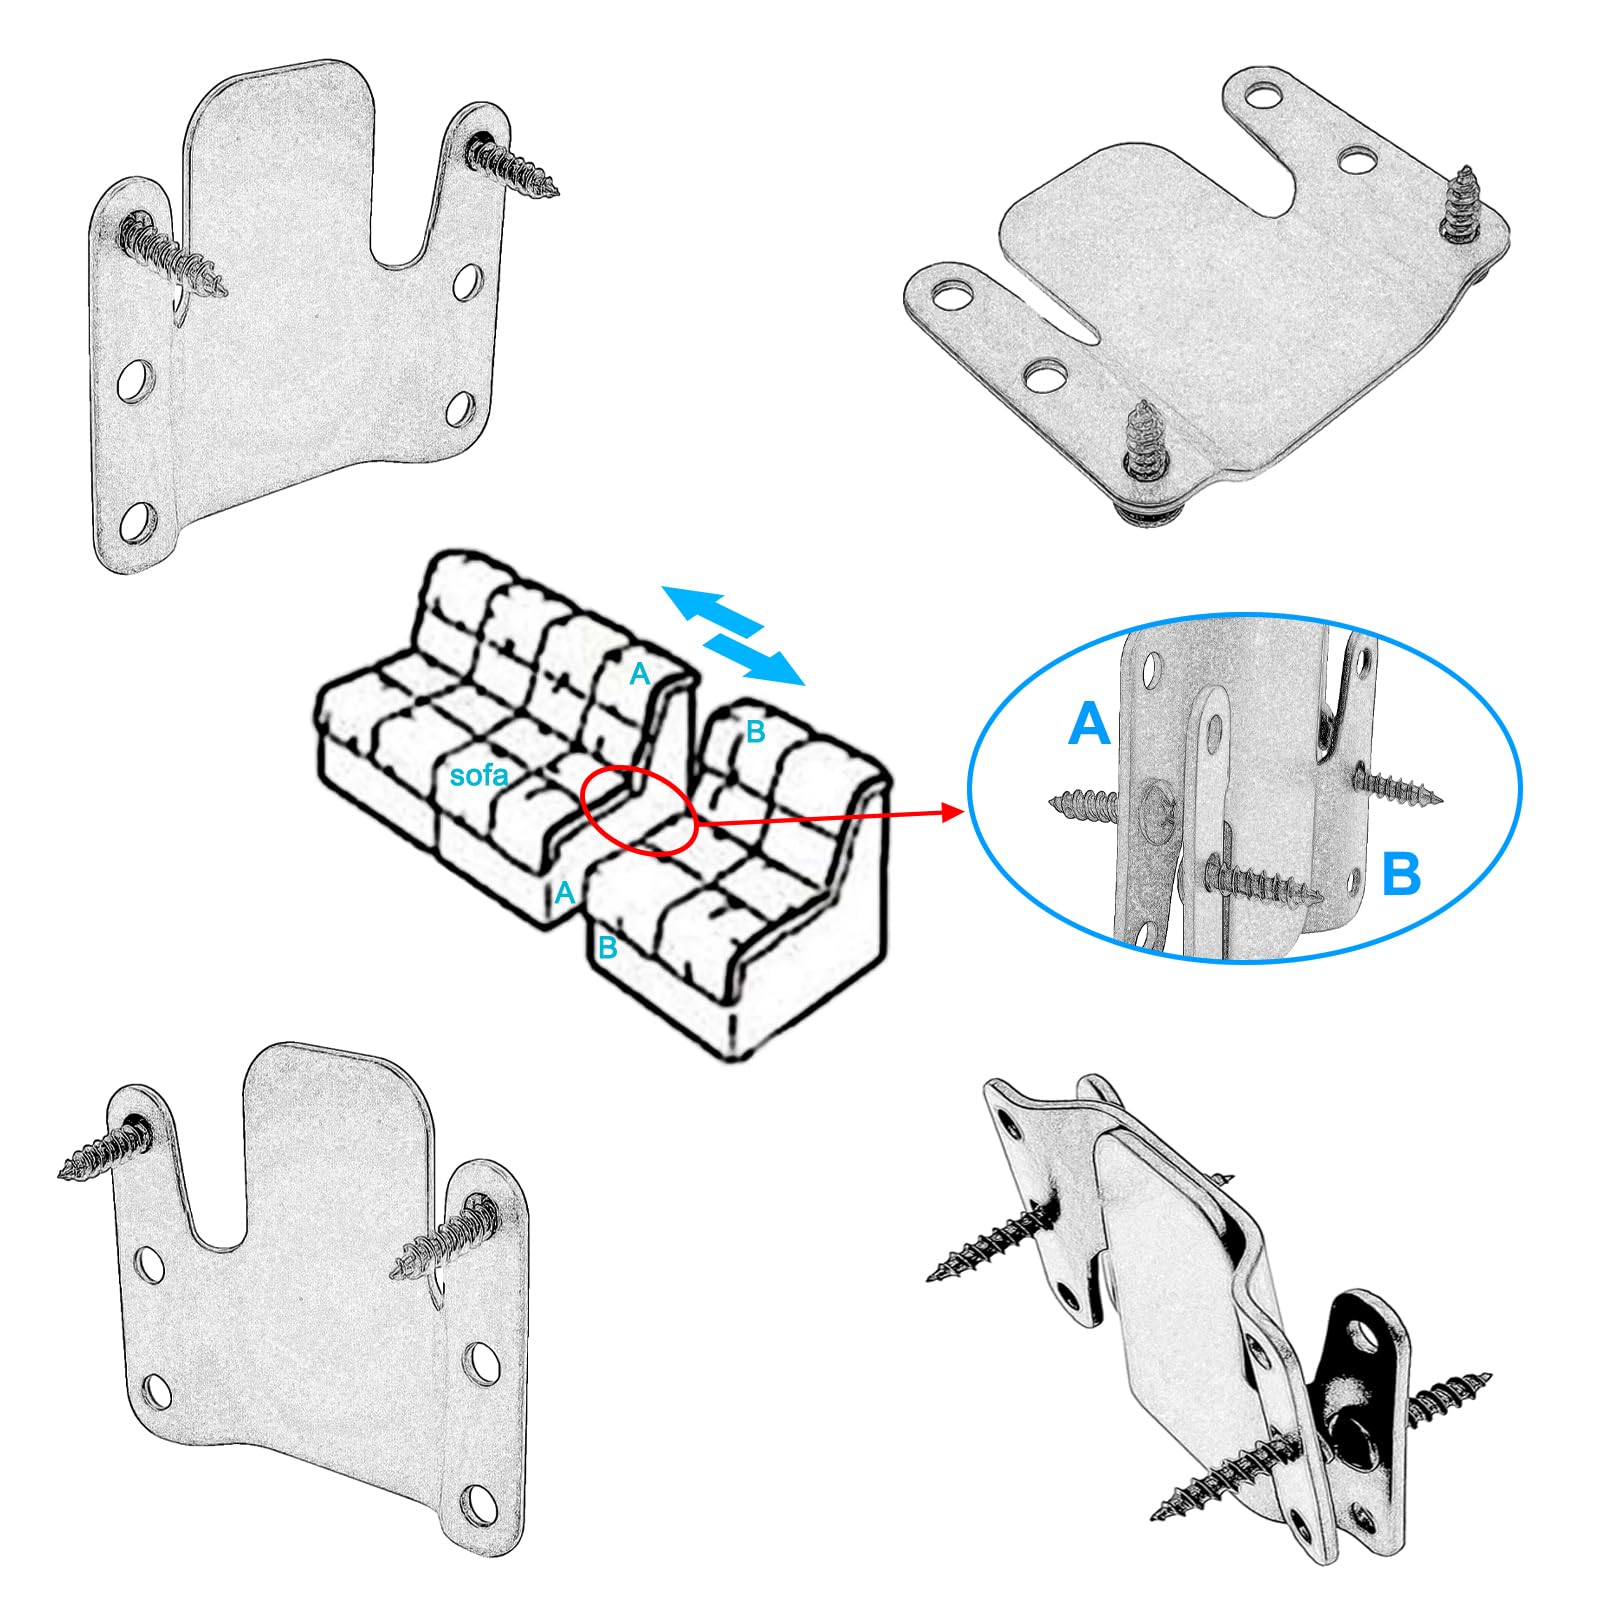 Sectional Couch Metal Connectors,4 Pcs Universal Sofa Interlocking Furniture Connector,Sectional Sofa Fastener Software Bracket with Screws for Loveseat, Recliner, Chair or Chaise Lounge (Black)